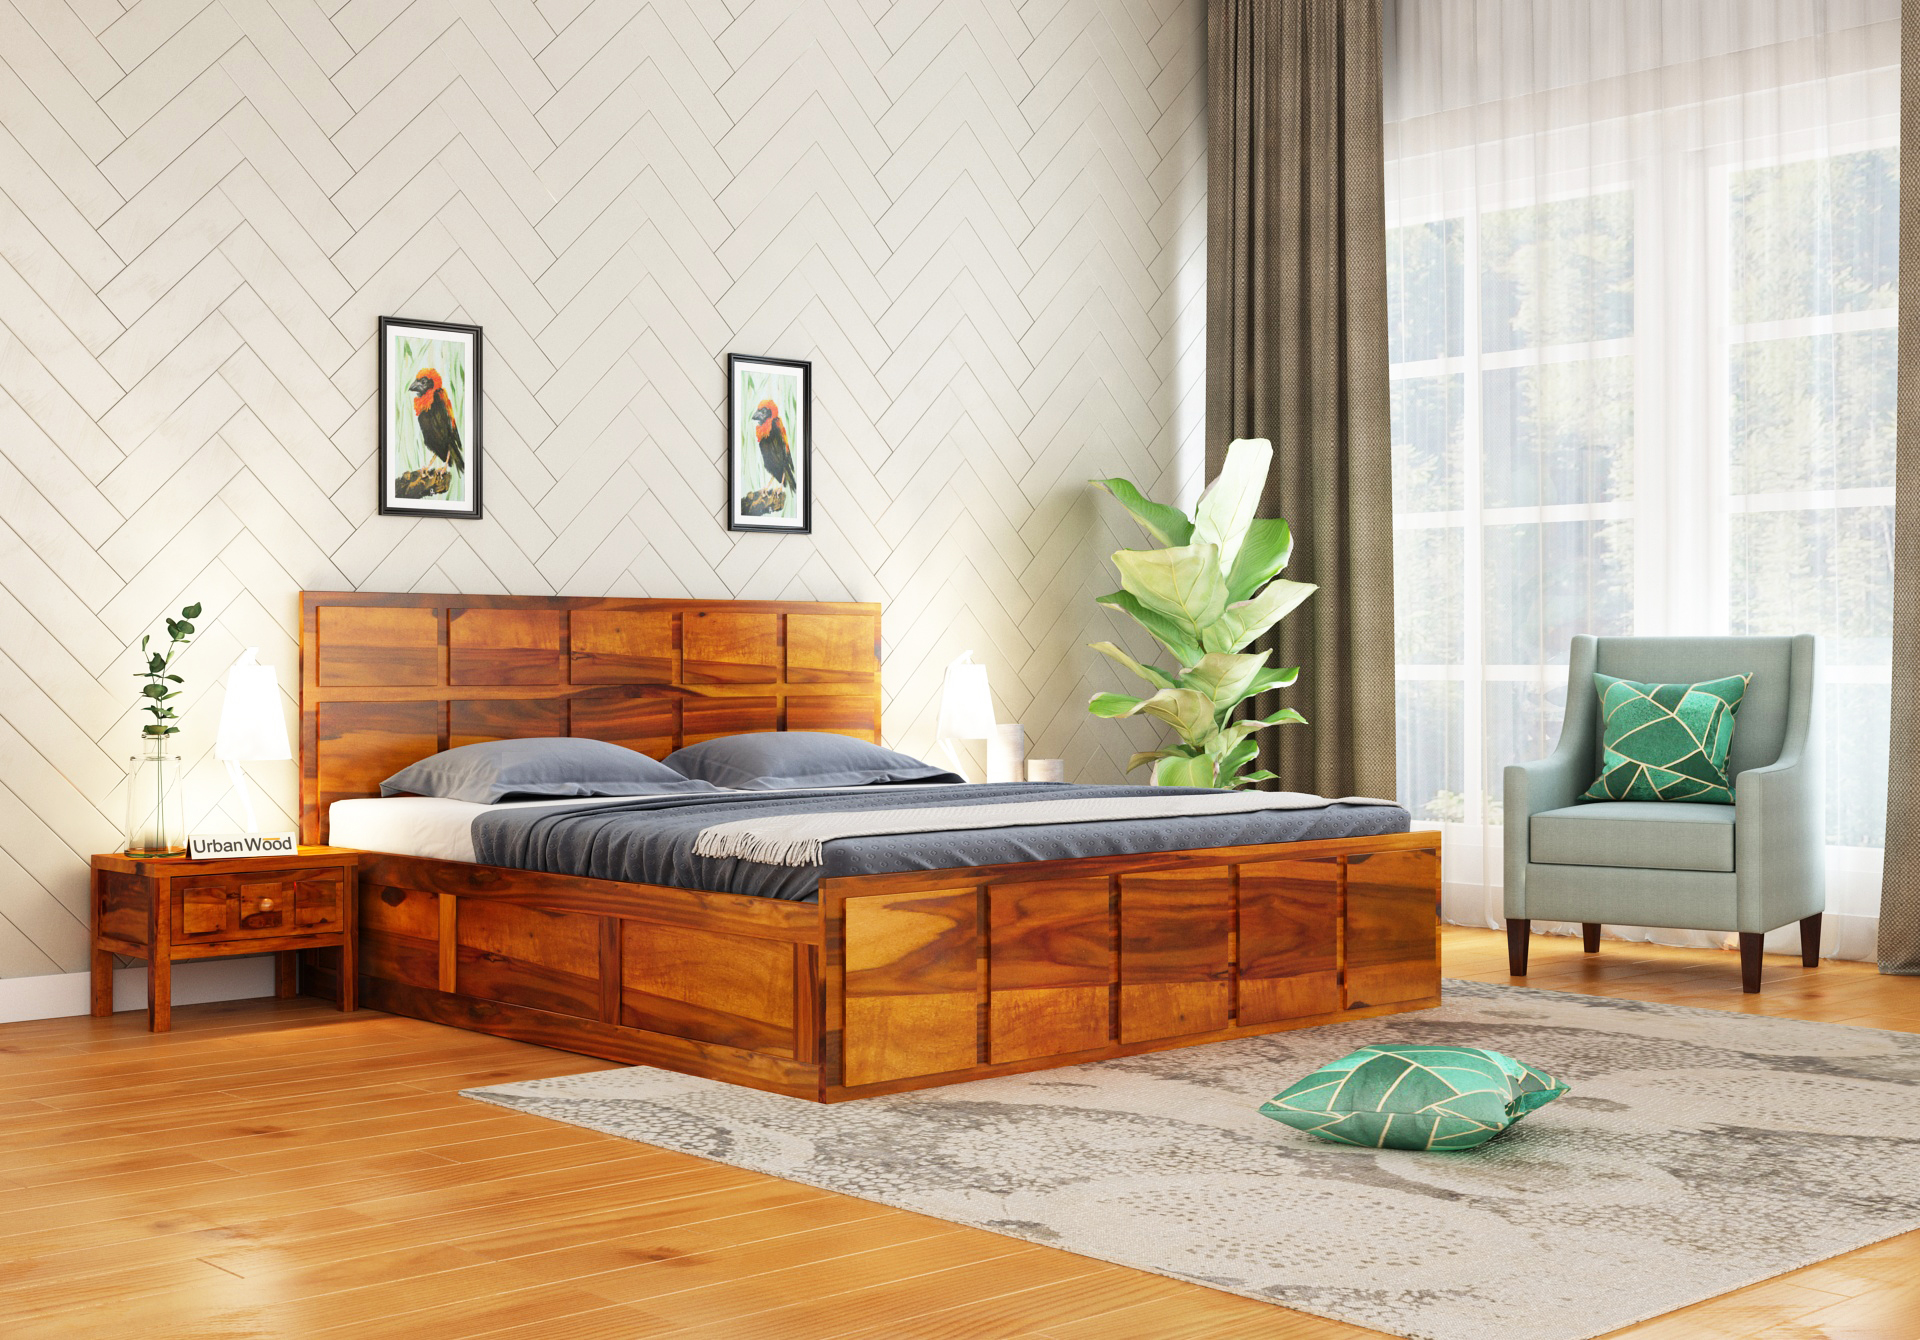 Bedswind Bed With Storage ( King Size, Honey Finish )